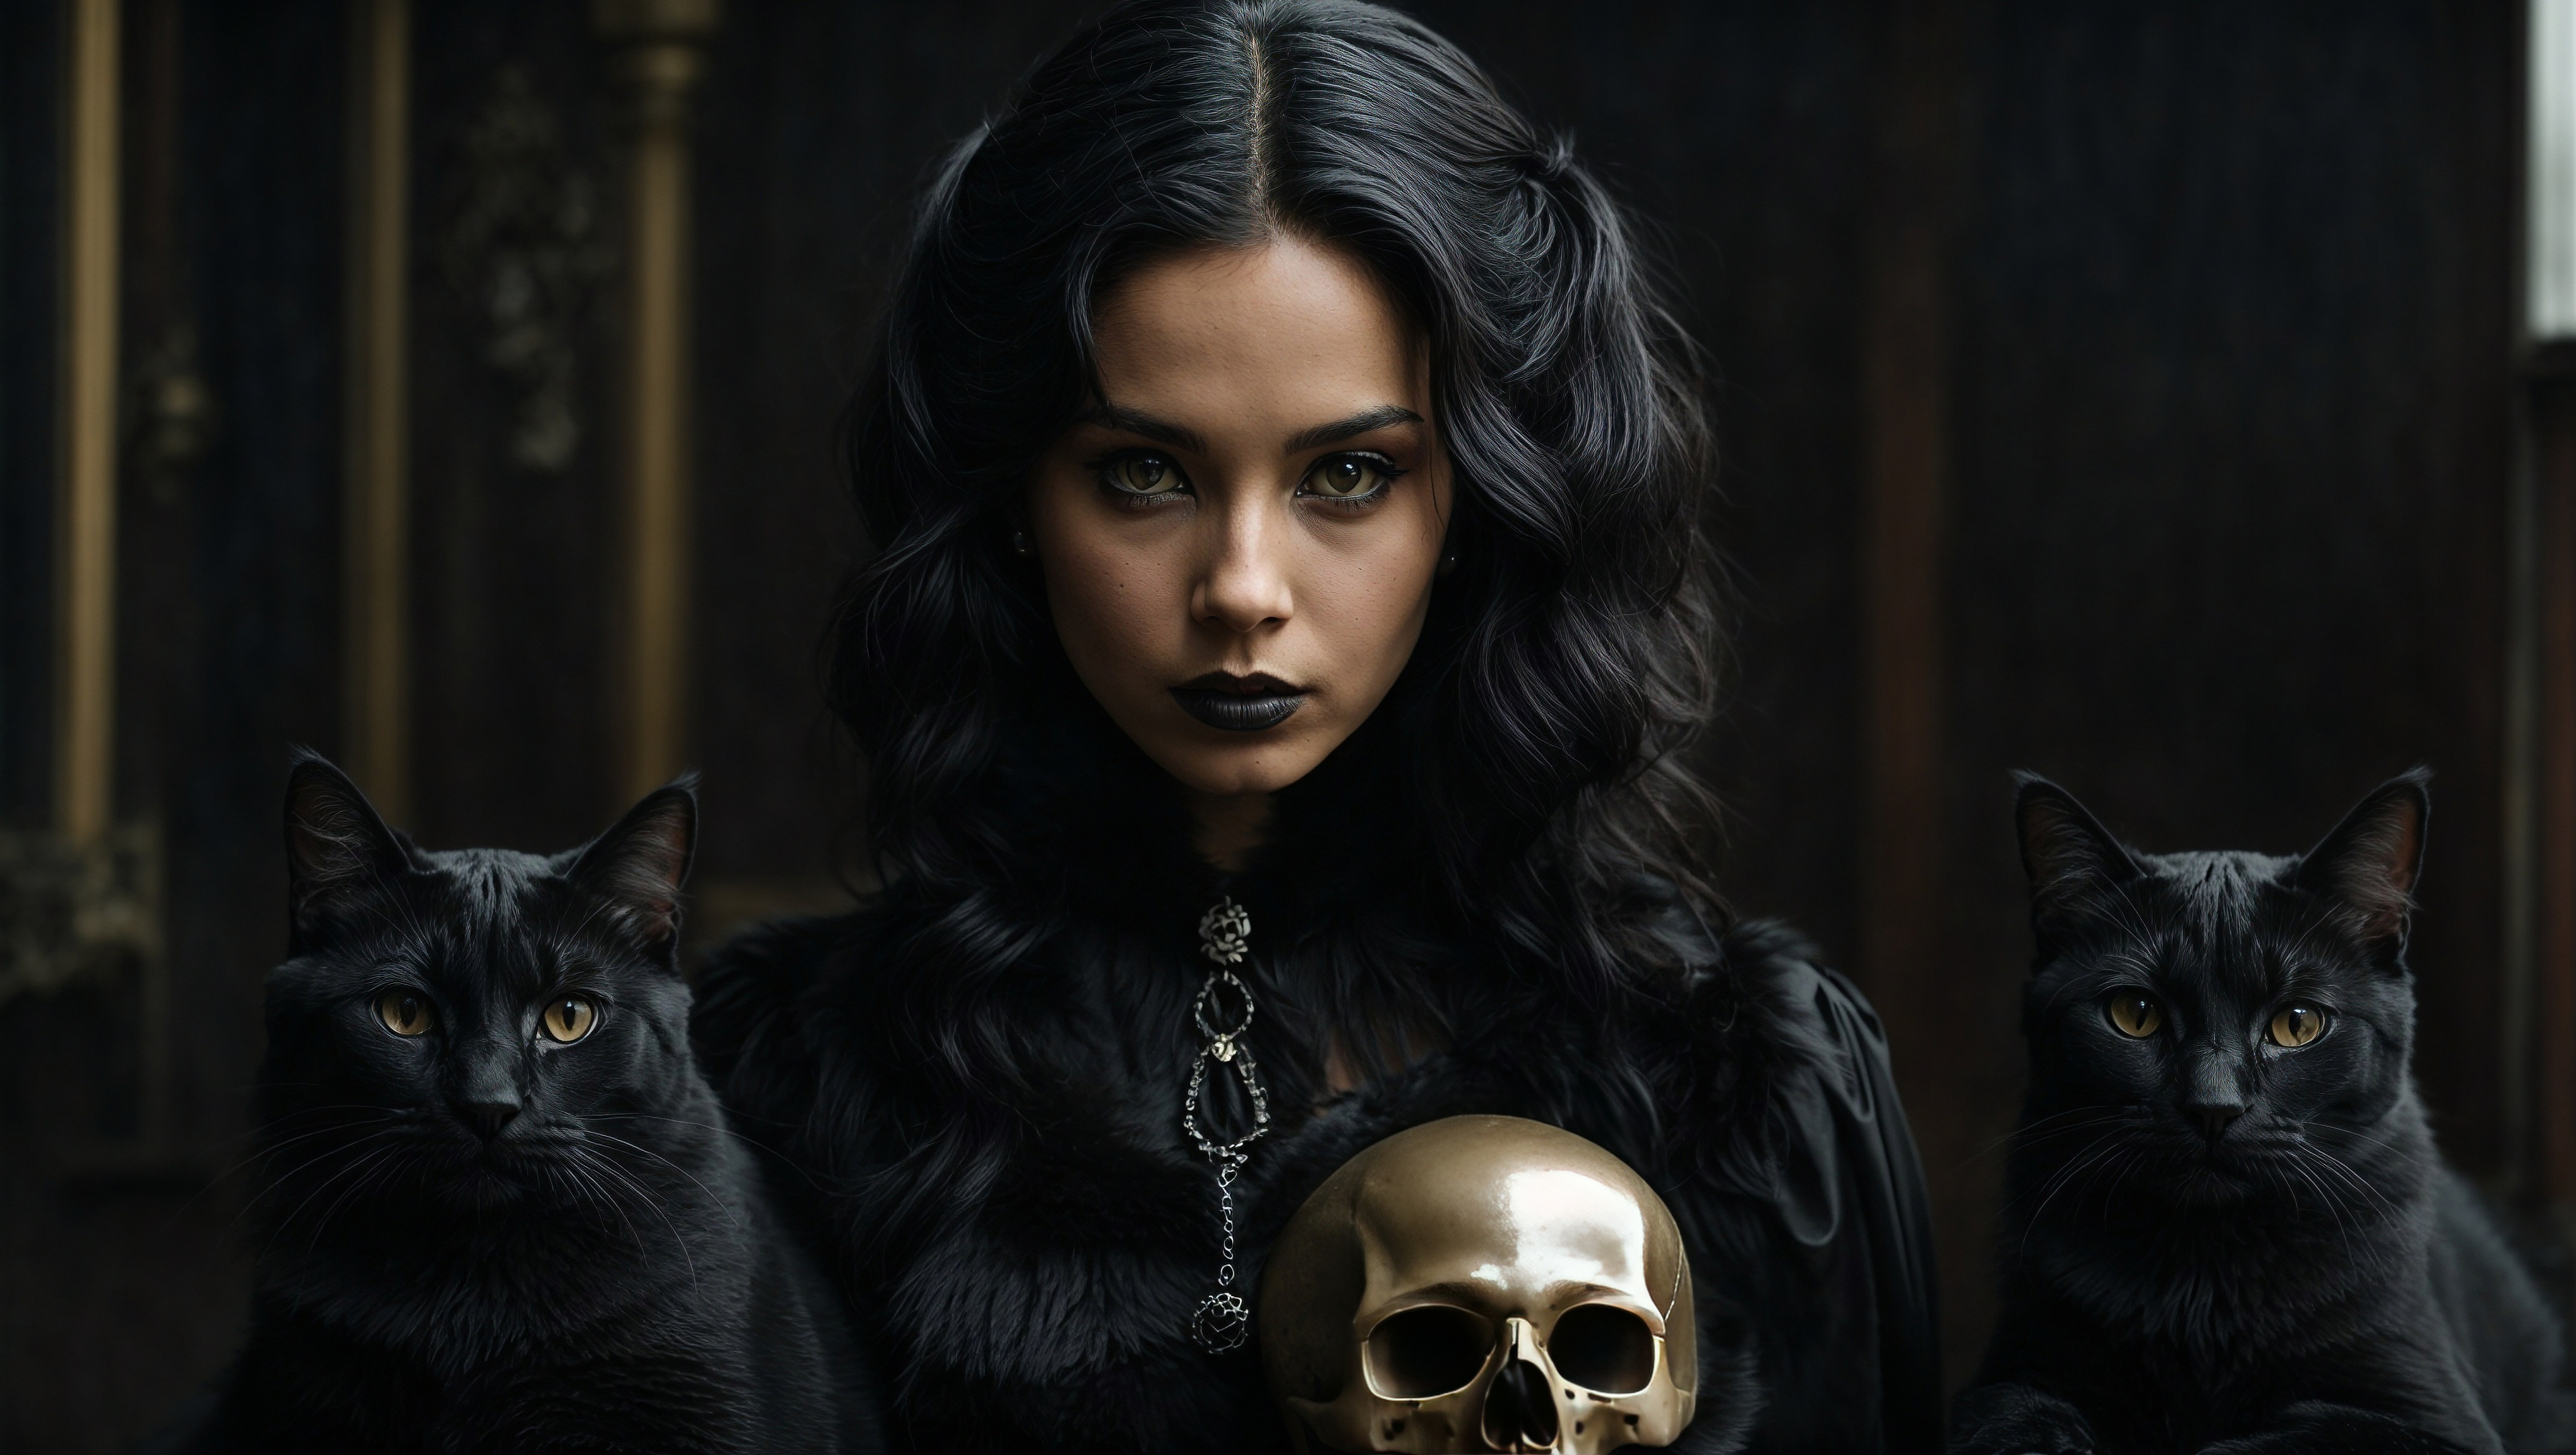 A woman is holding a gold skull, and three black cats